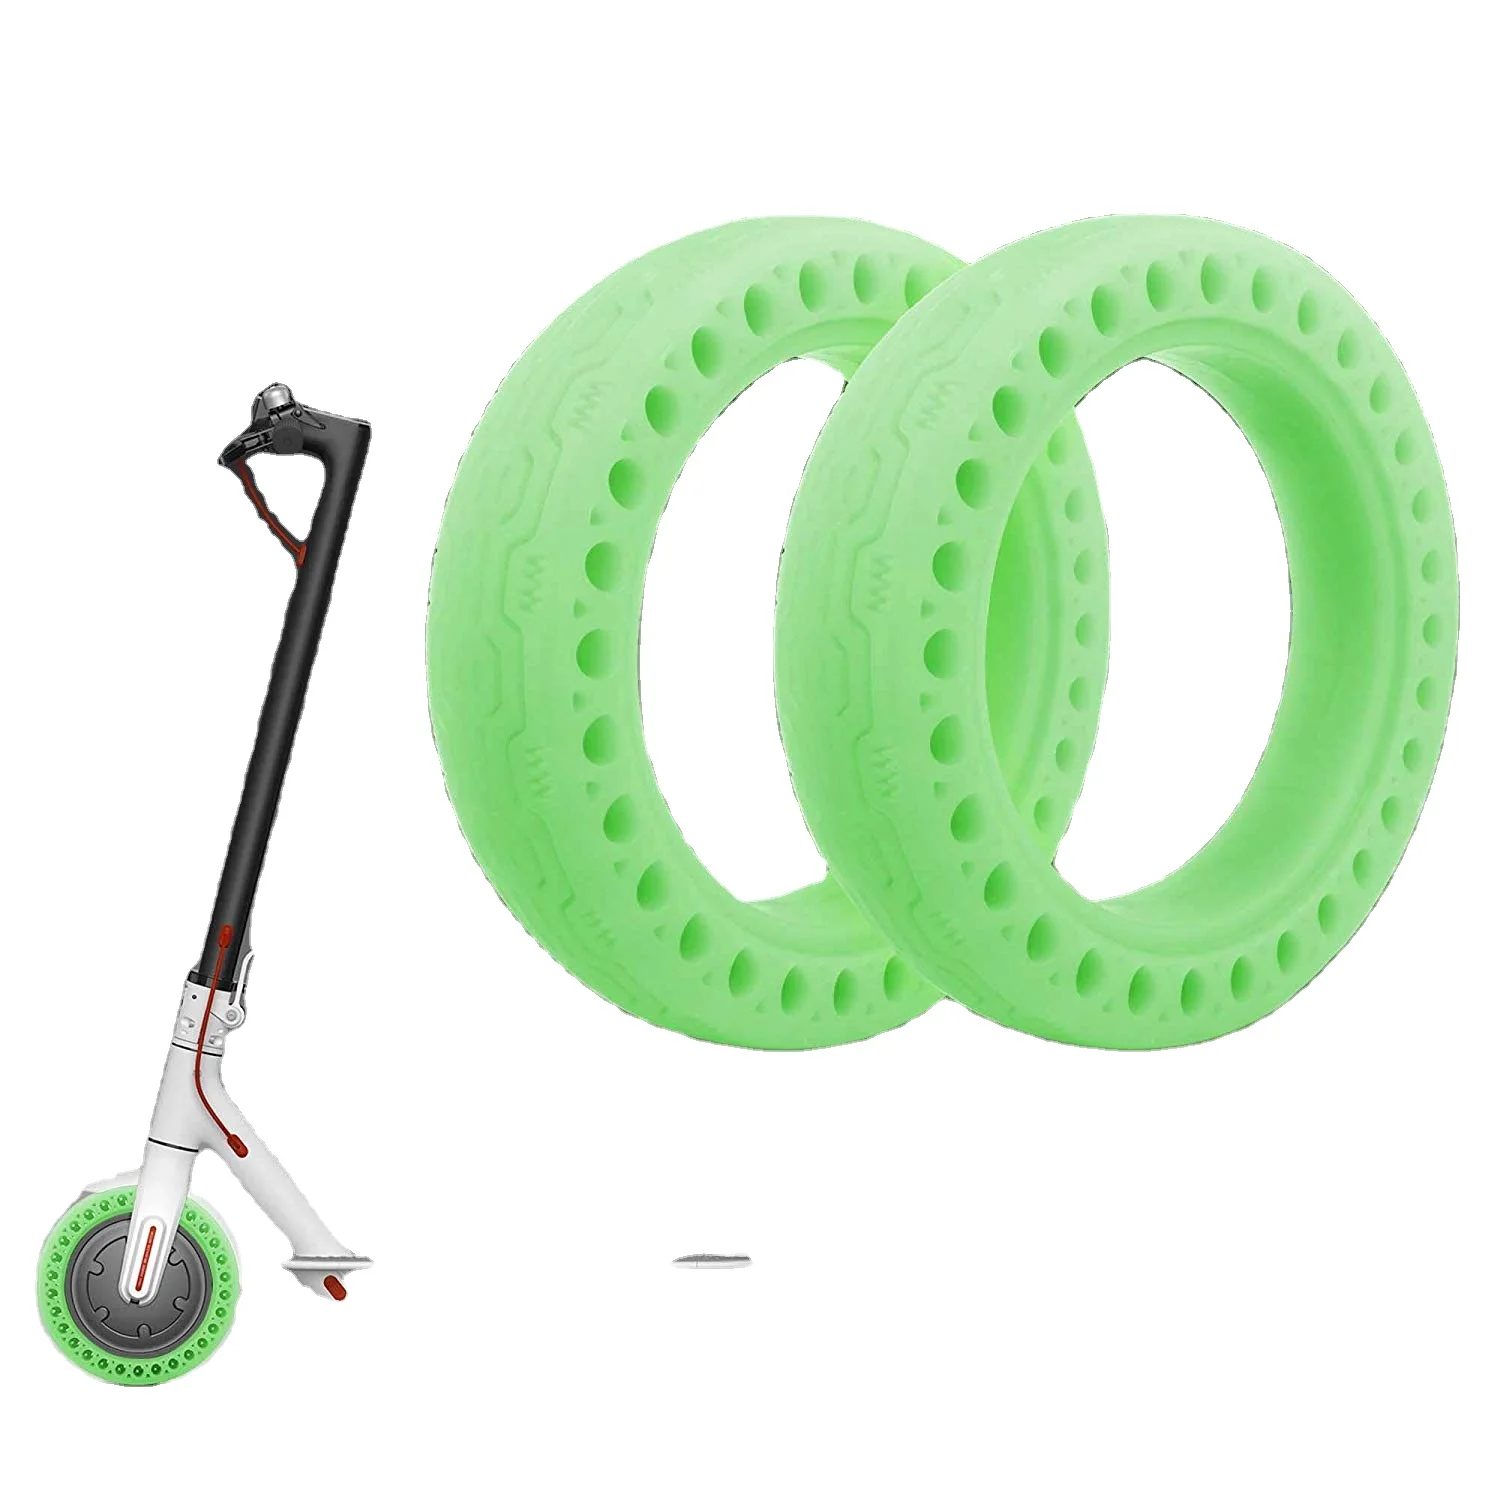 

Night Fluorescent Tires Luminous tubeless solid Honeycomb tire for Mijia M365 Pro 1S and pro2 skateboard Green scooter tires